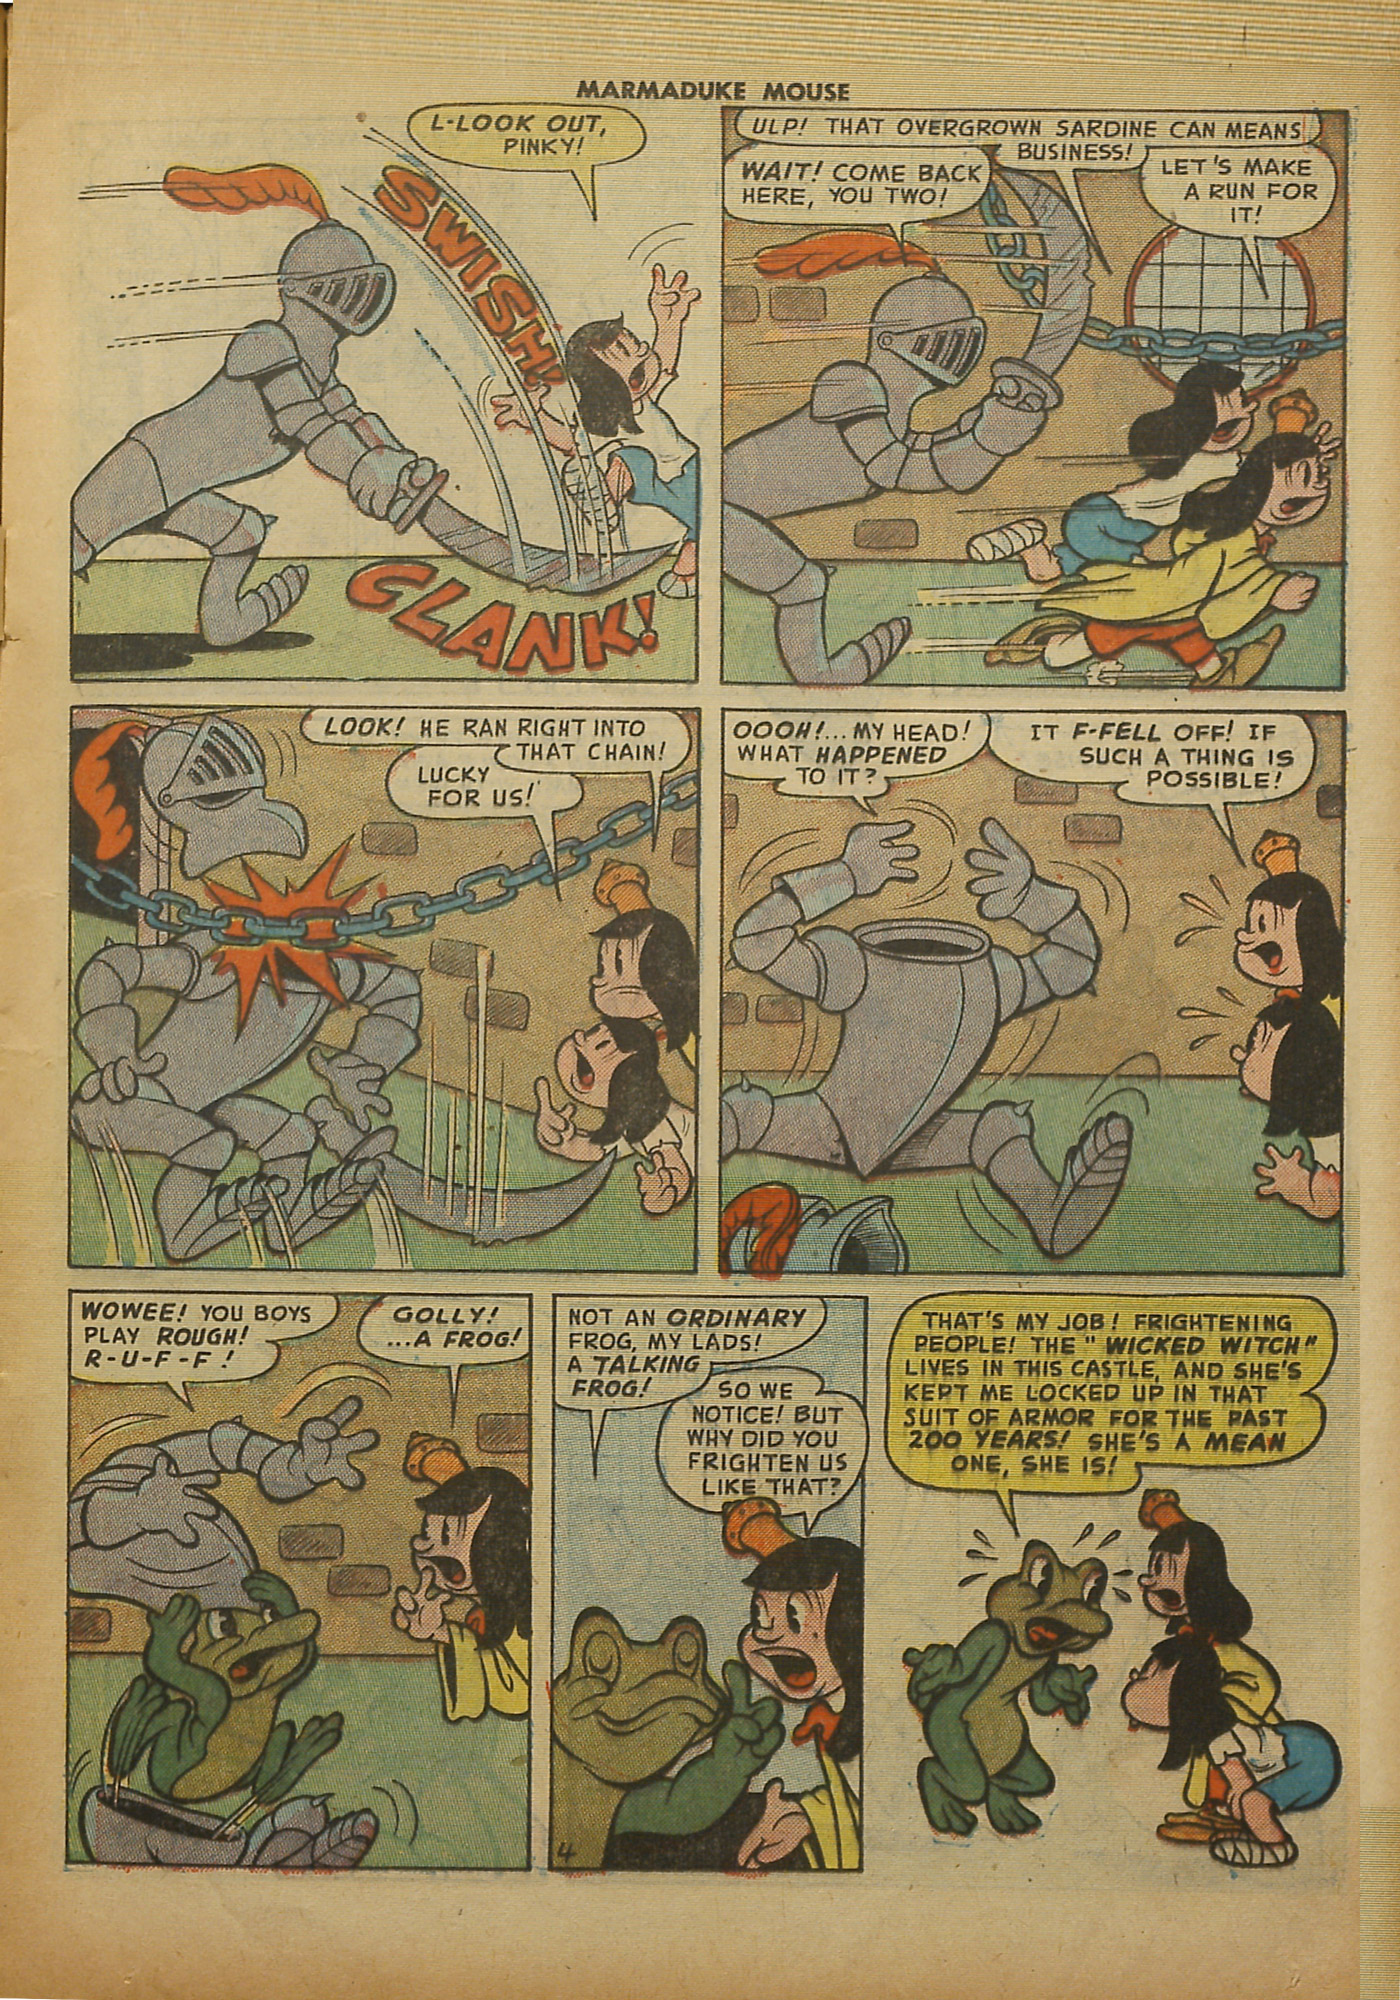 Read online Marmaduke Mouse comic -  Issue #32 - 13